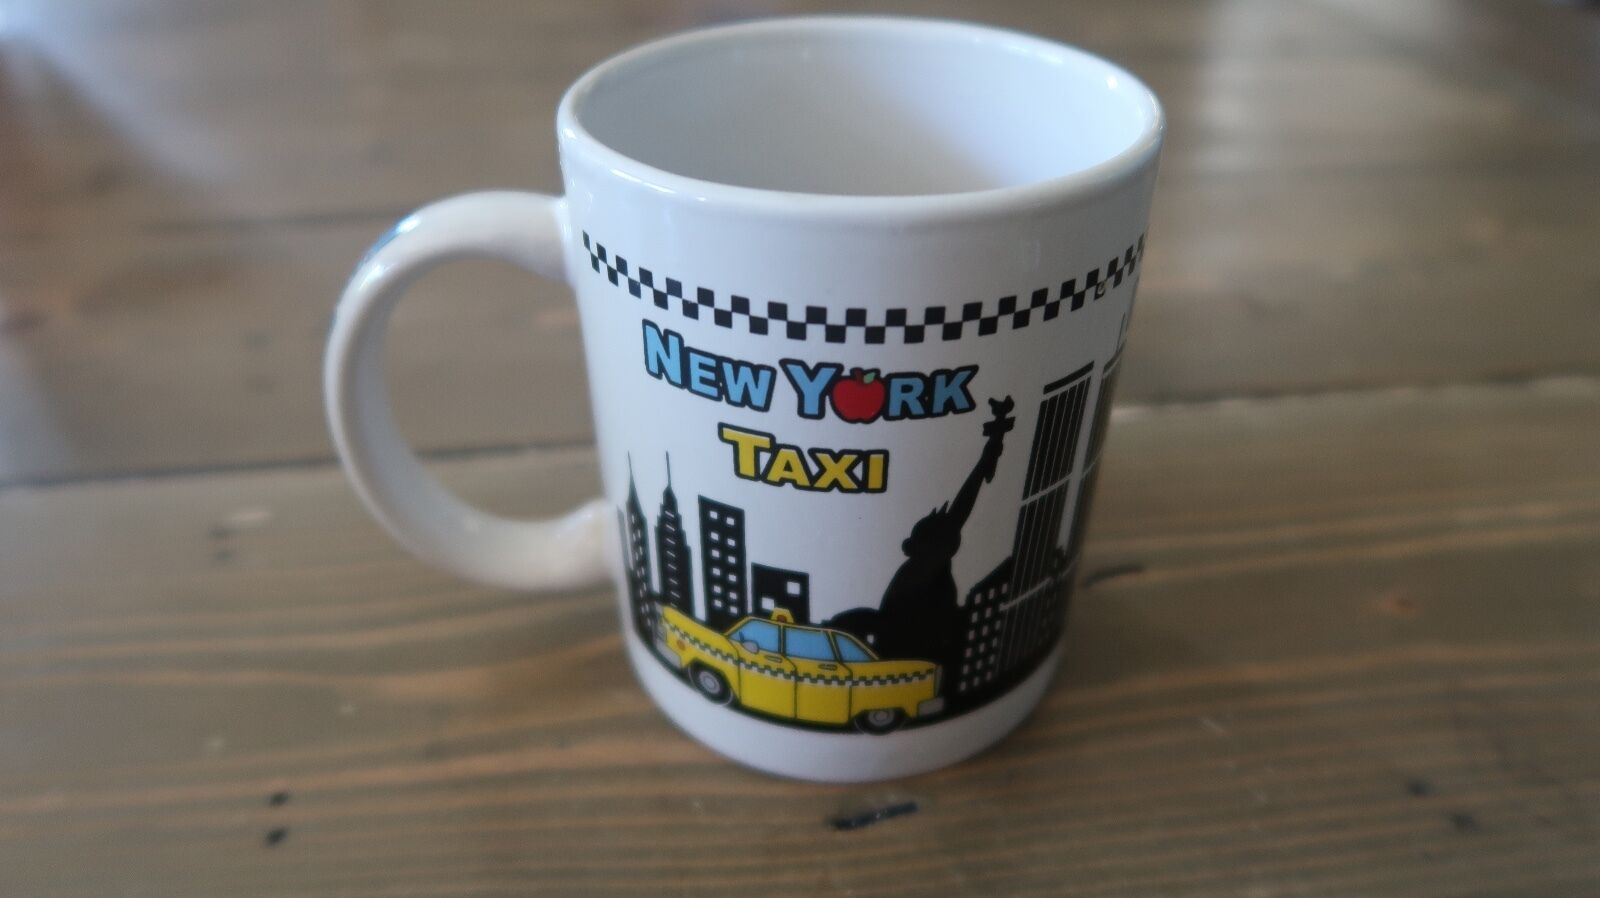 Vintage New York Taxi Mug, Small cut in the top